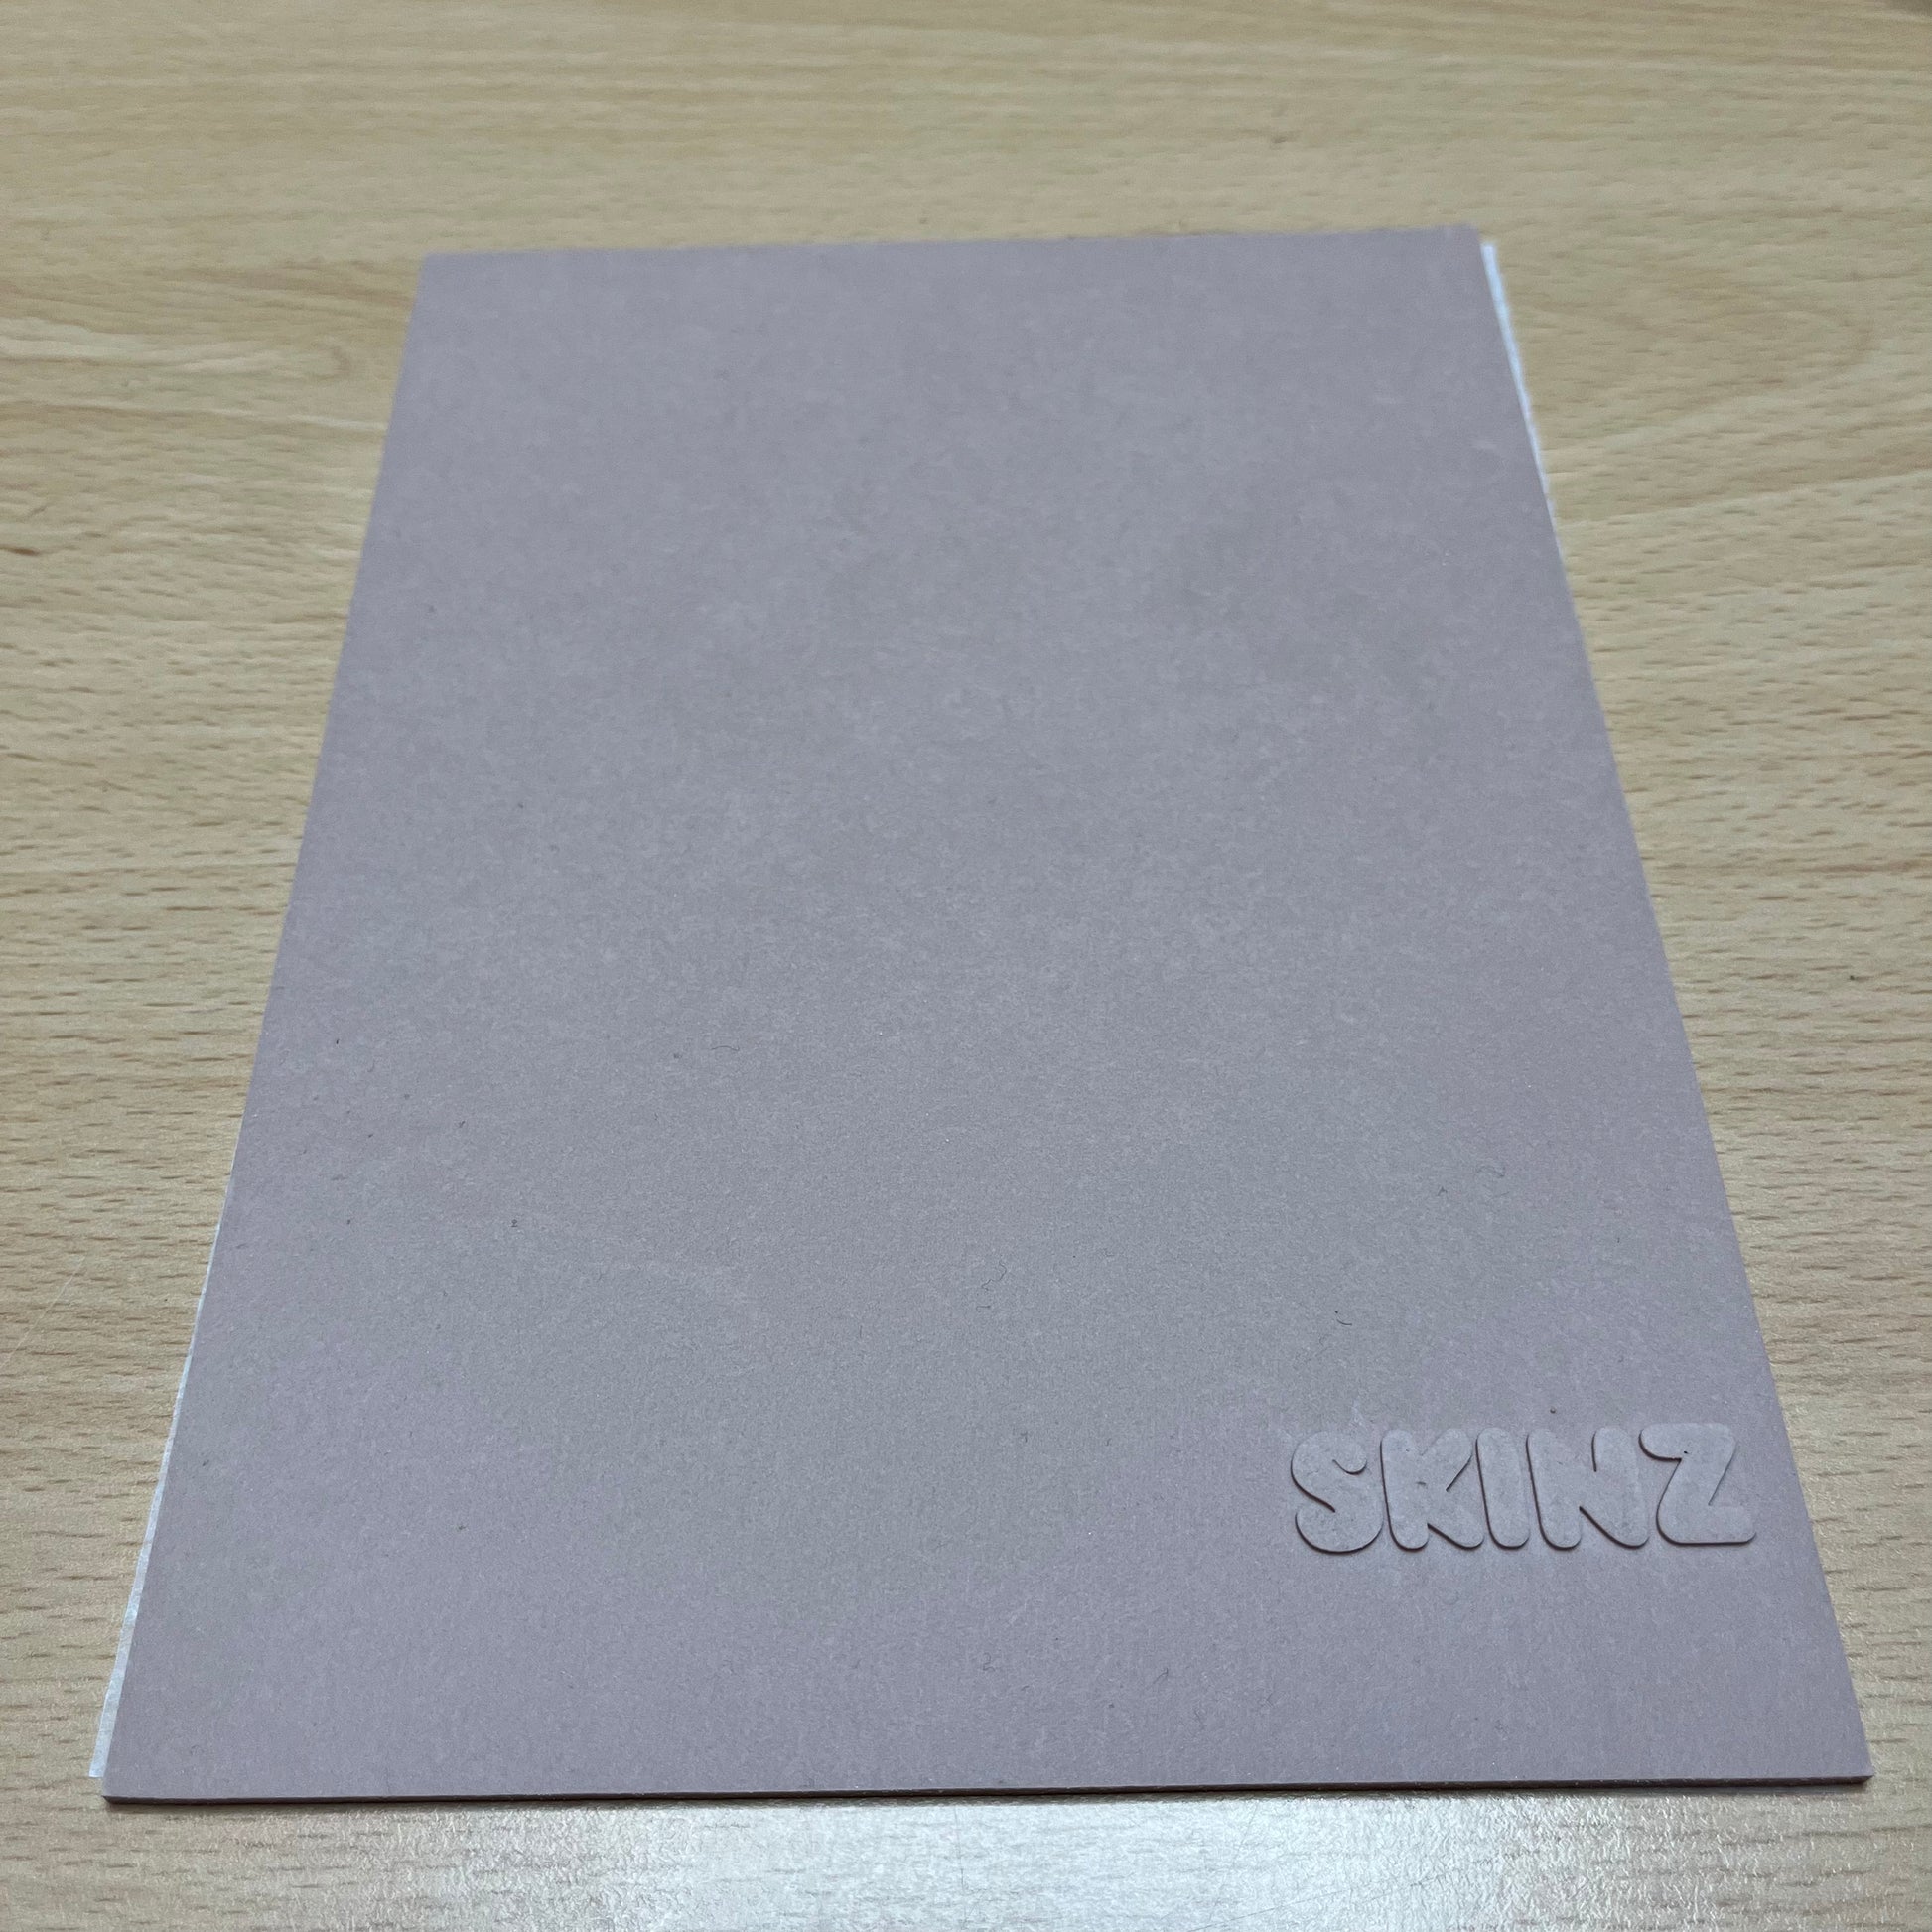 Skinz - the best for fake tattoo skin